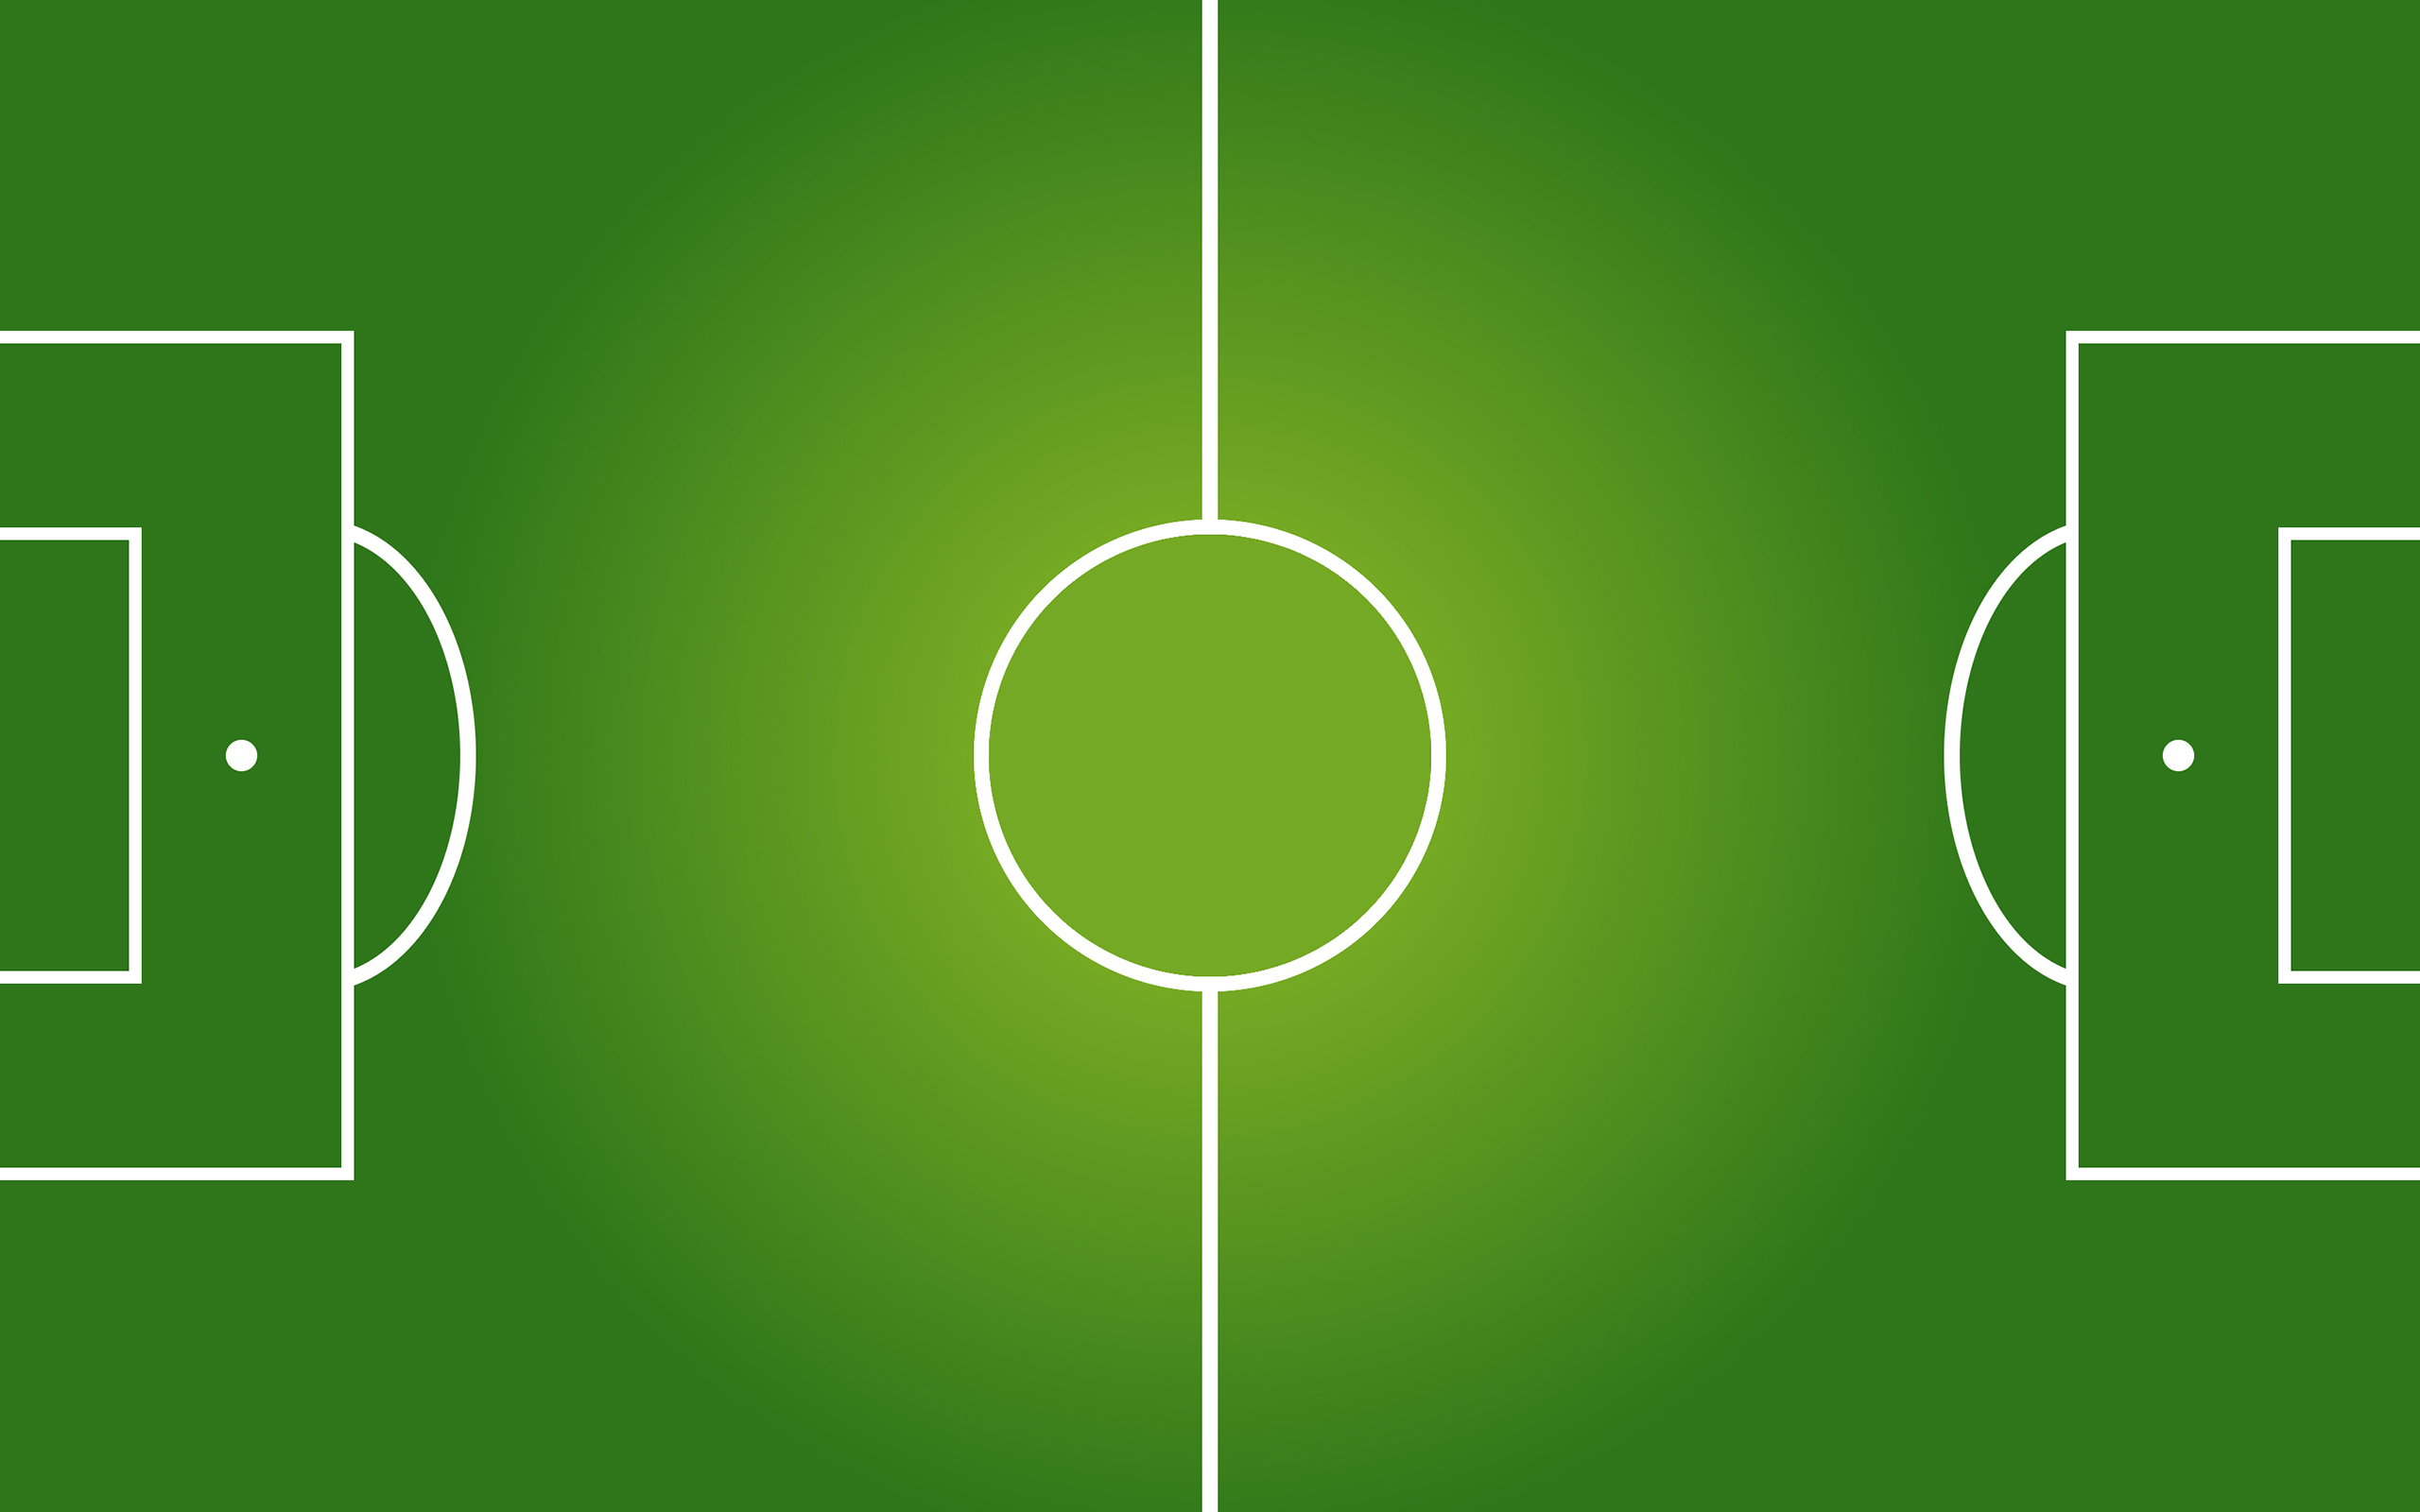 General 2560x1600 soccer pitches sport minimalism gradient green green background digital art simple background